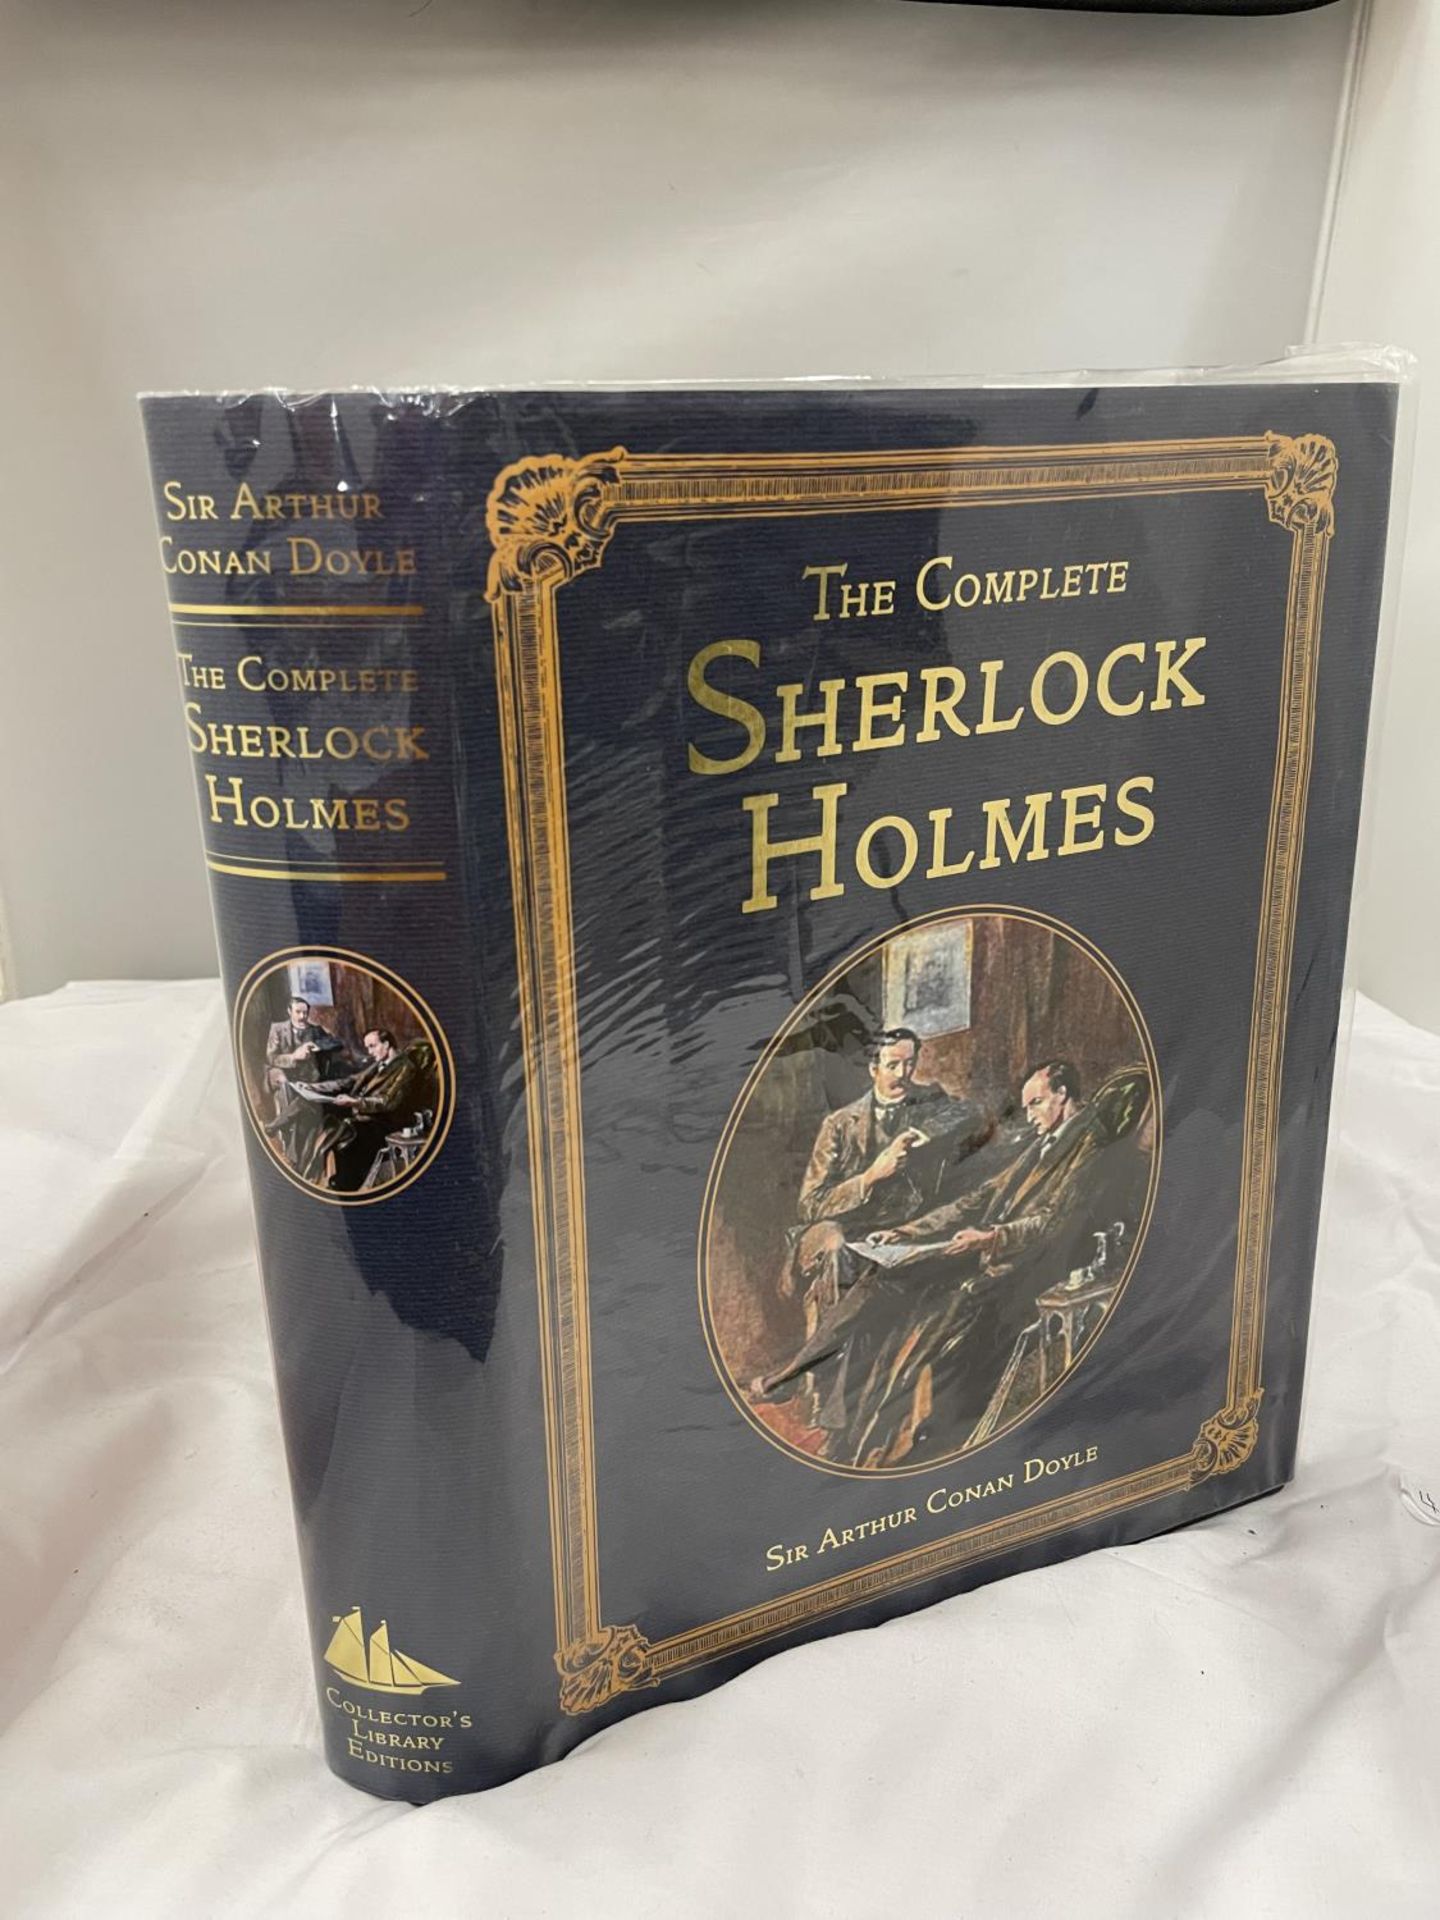 A COPY OF THE COMPLETE SHERLOCK HOLMES, AUTHOR SIR ARTHUR CONAN DOYLE, PUBLISHED BY COLLECTORS'